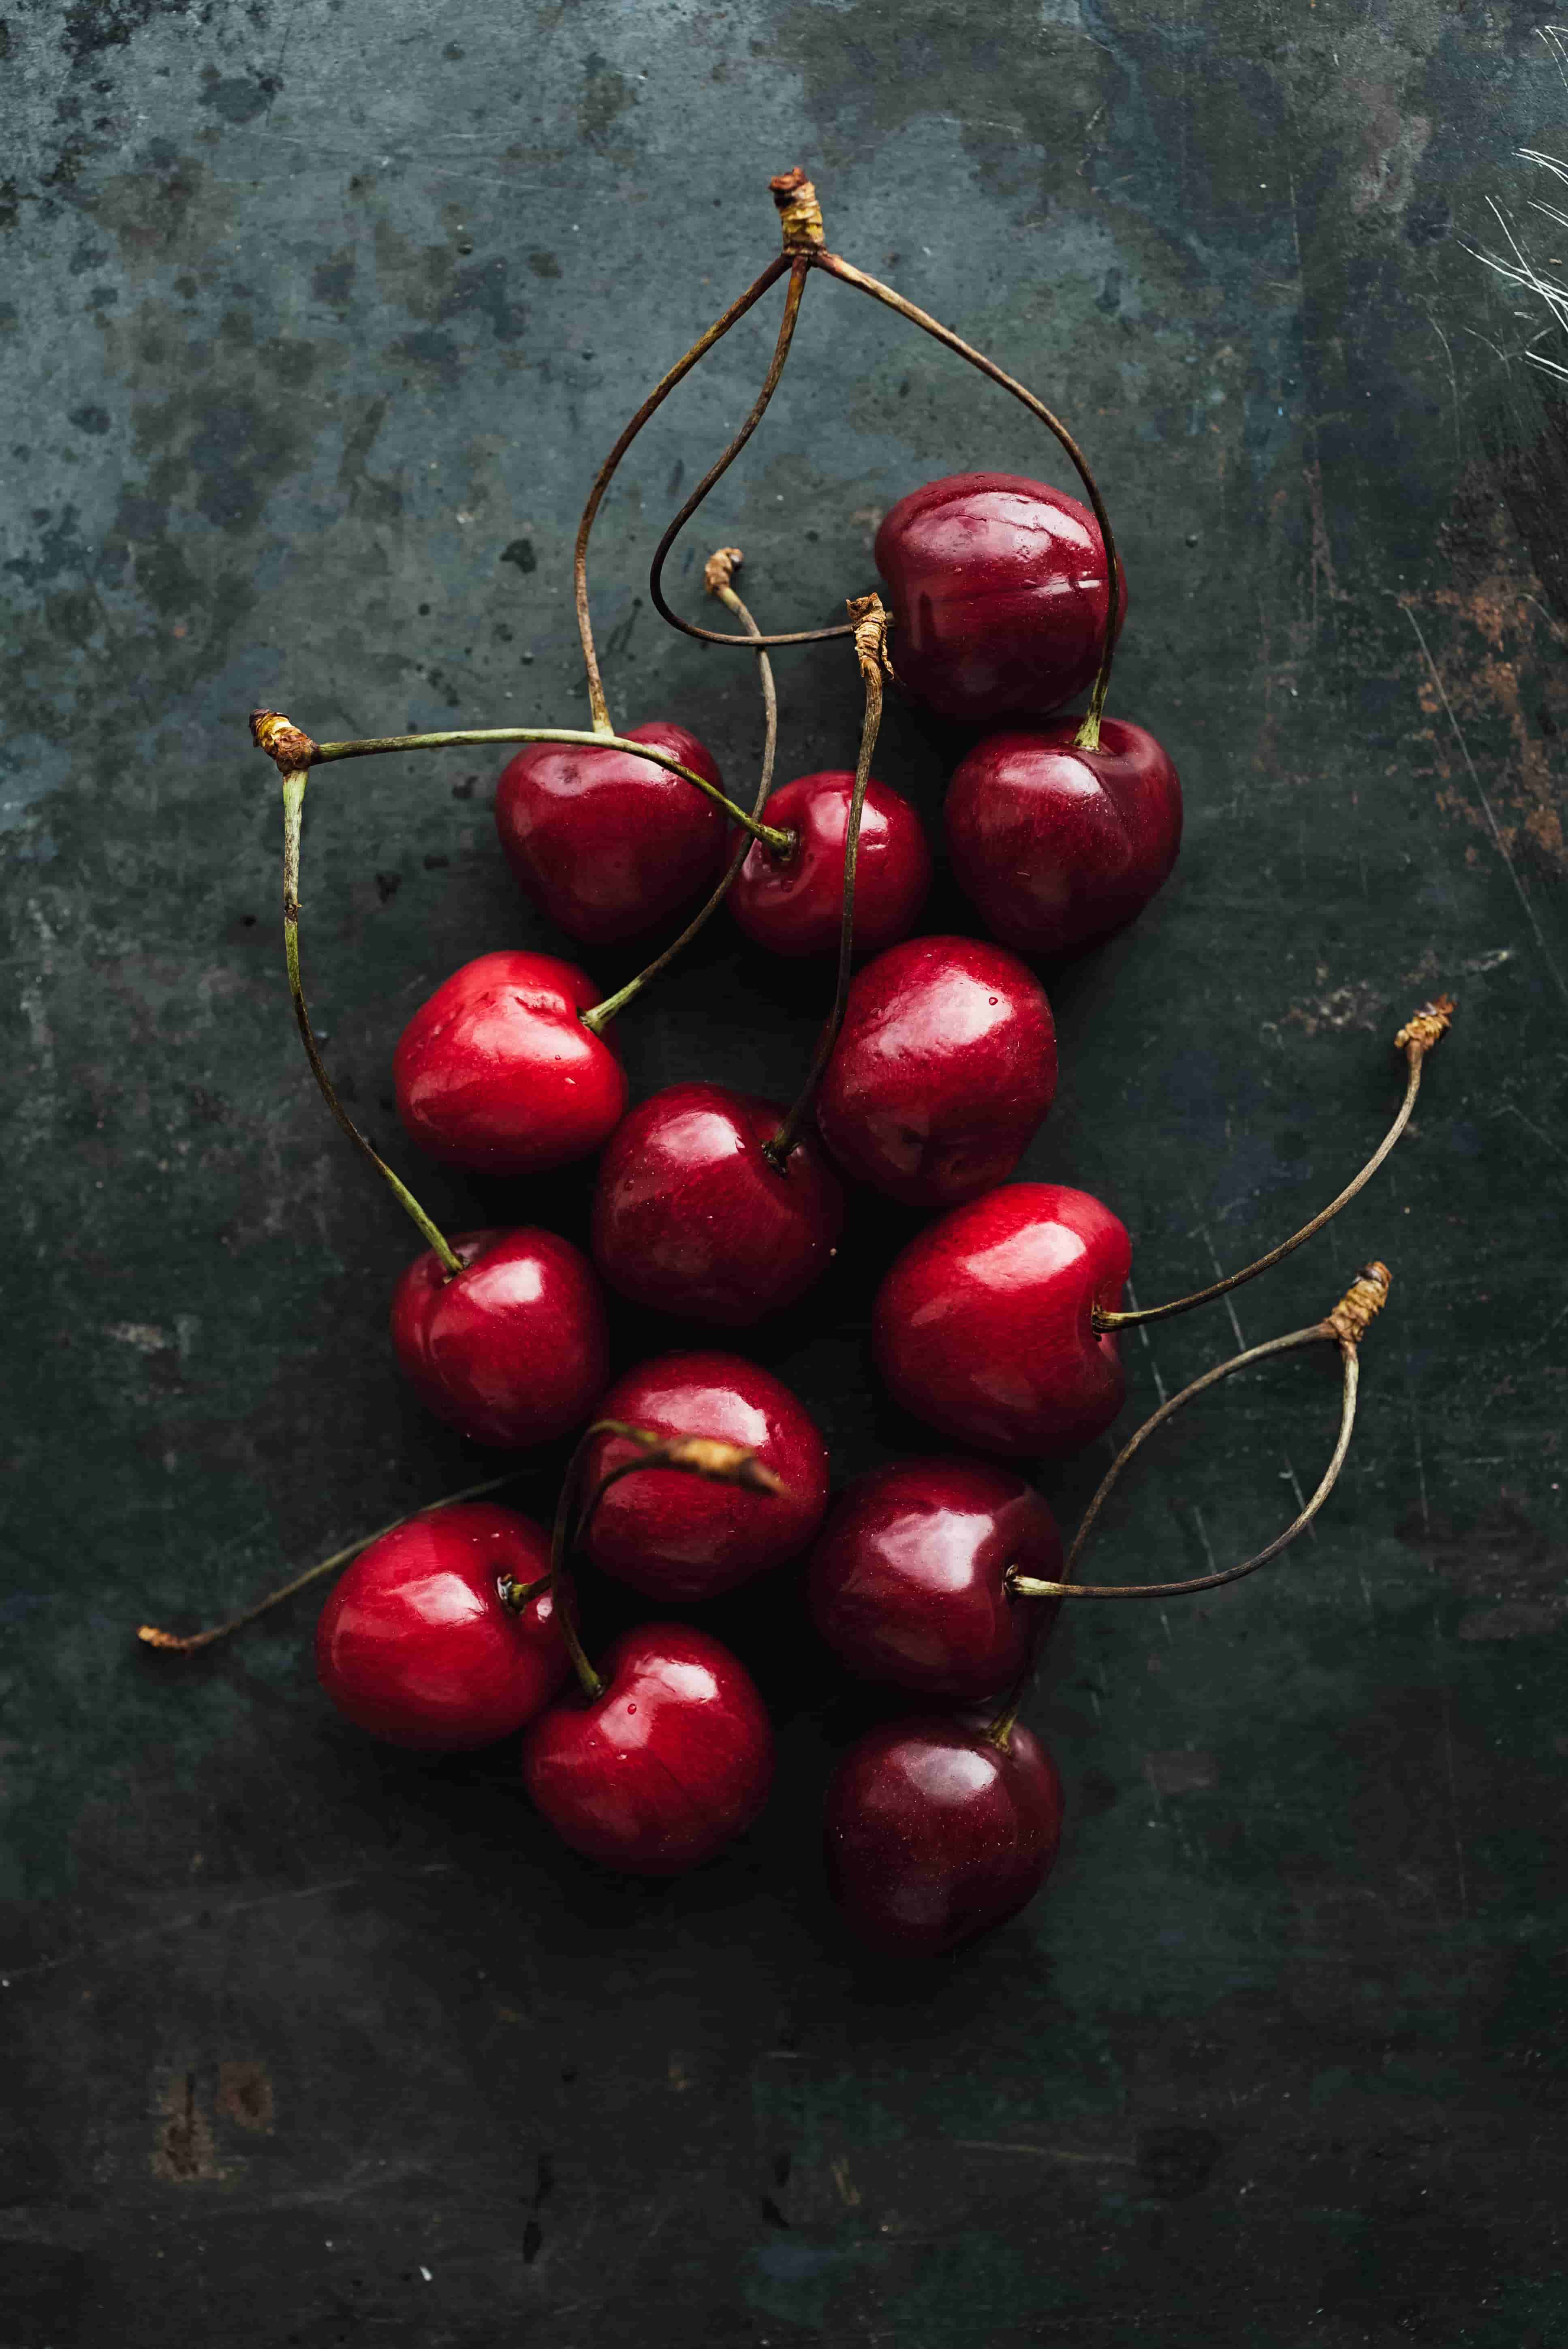 wallpaper for mobile,cherry,red,fruit,plant,still life photography